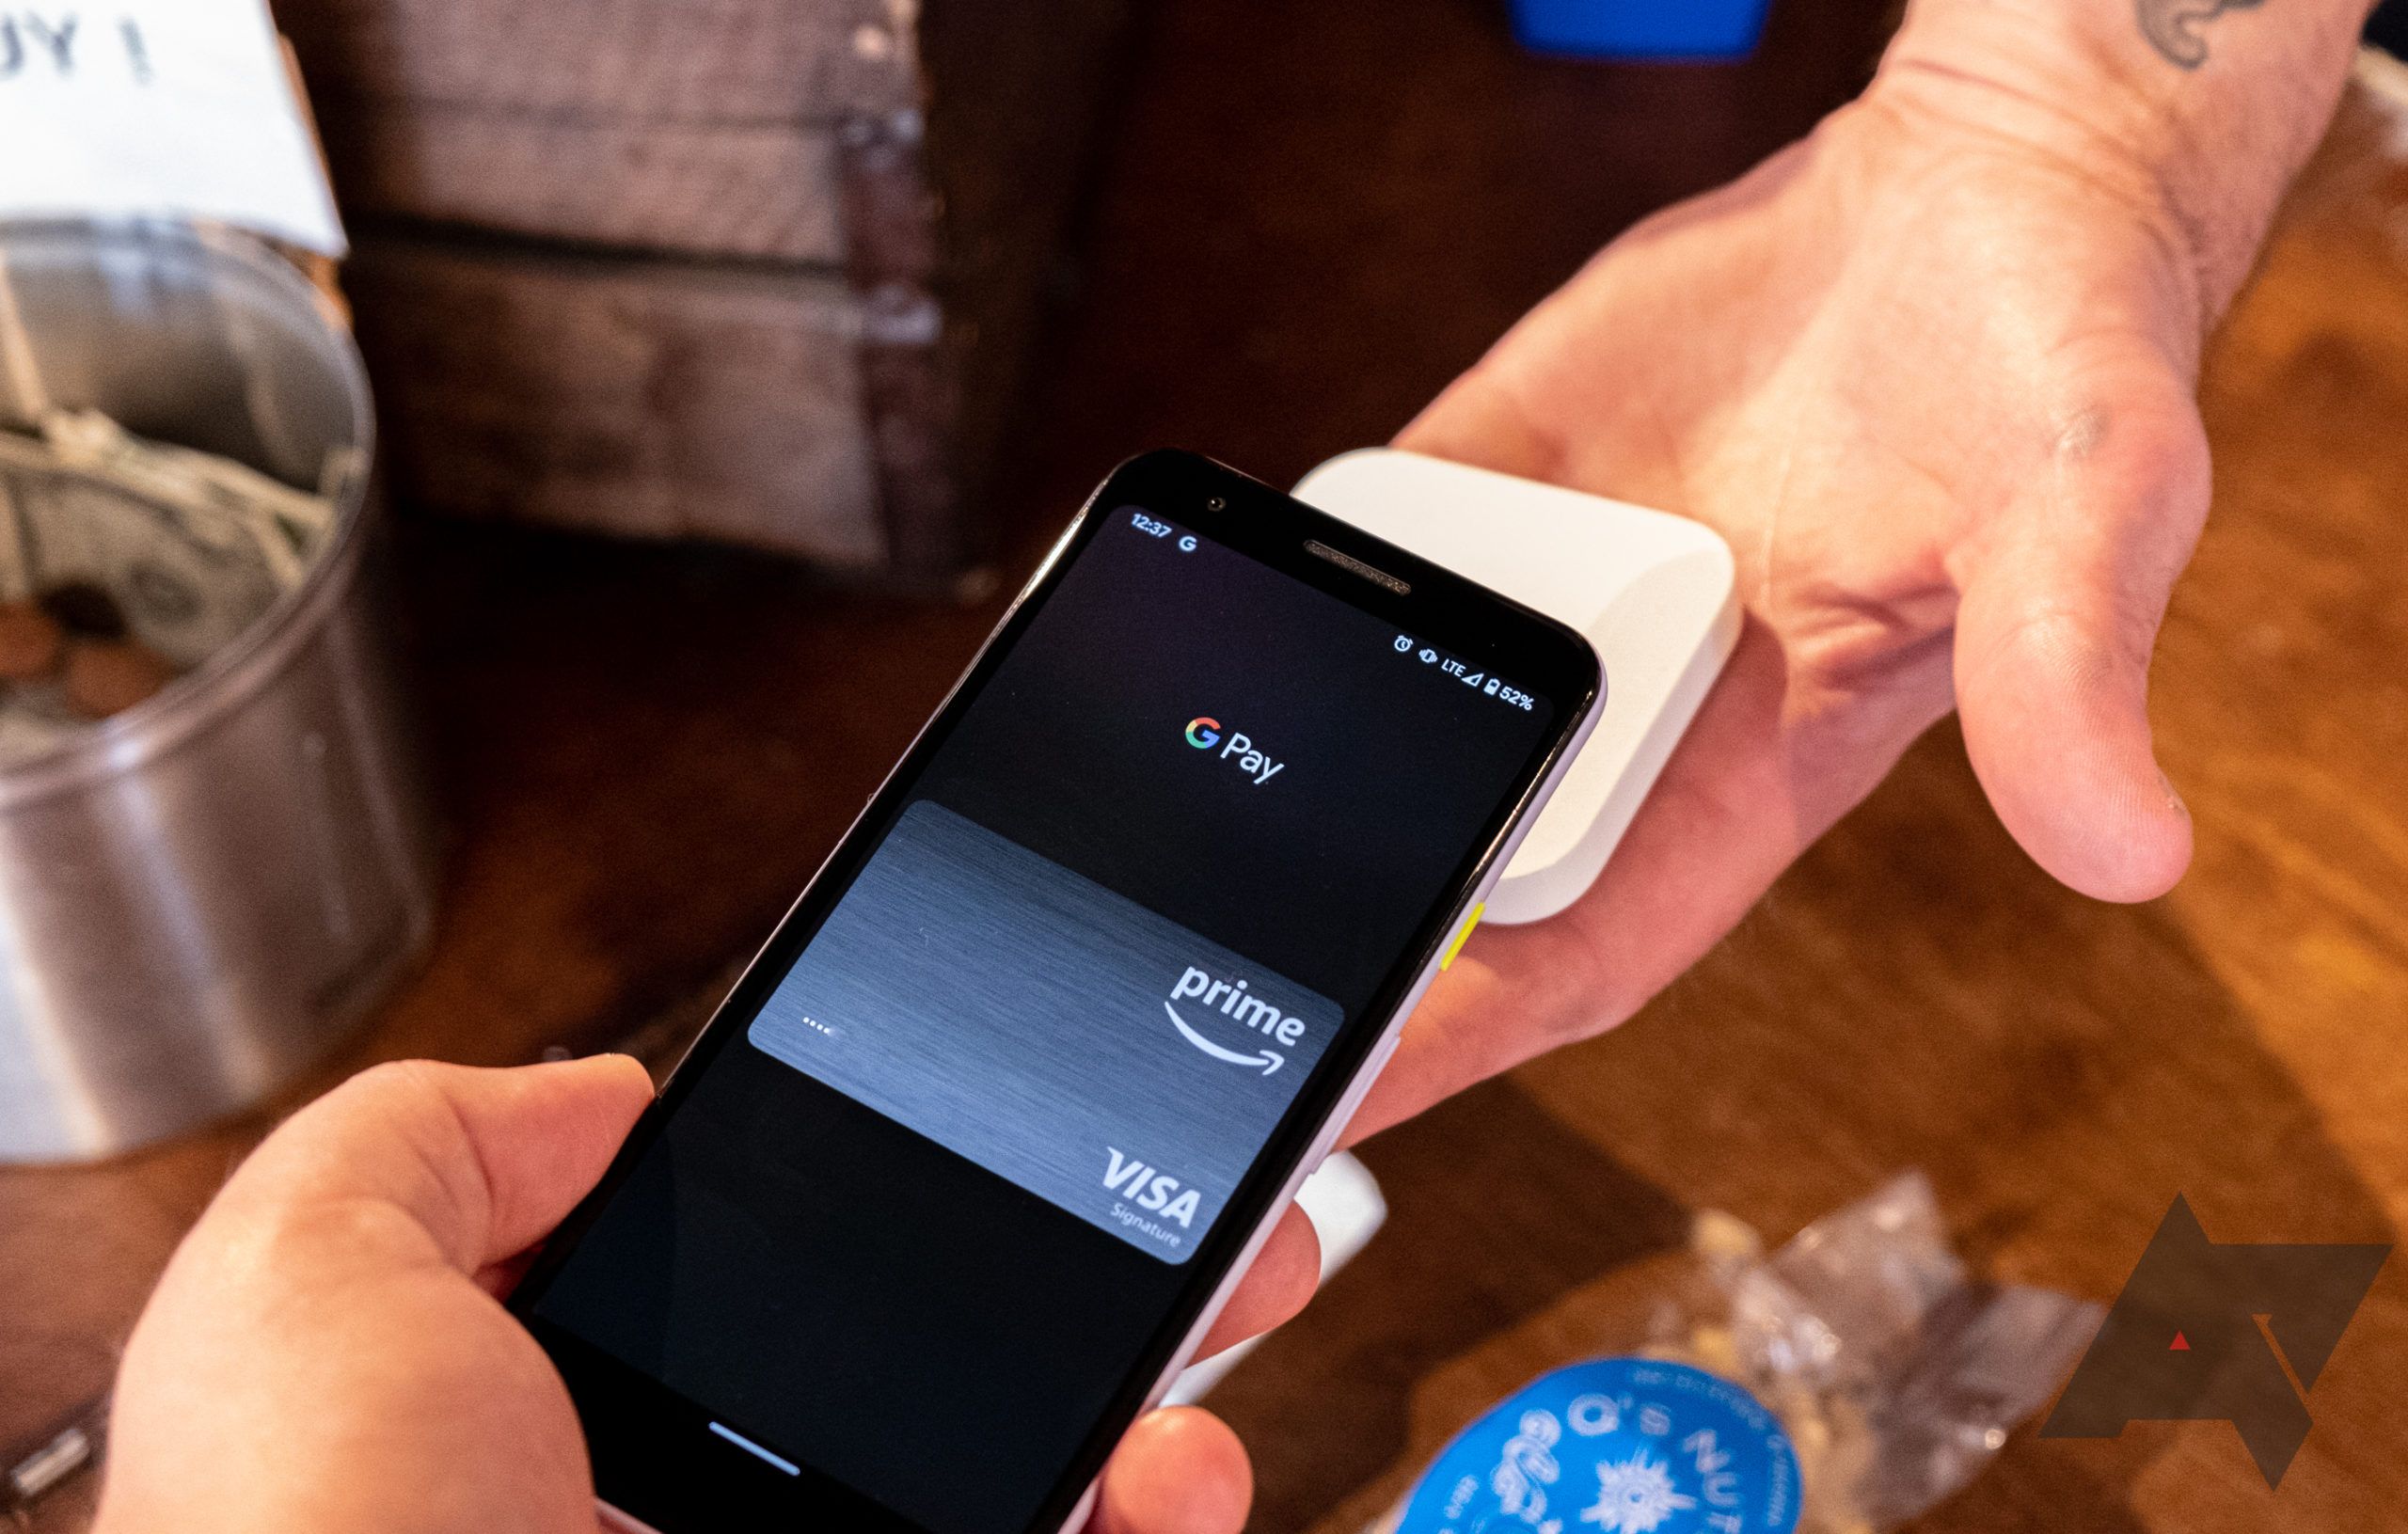 Google Pay vs. Samsung Pay: Which tap to pay system is best?